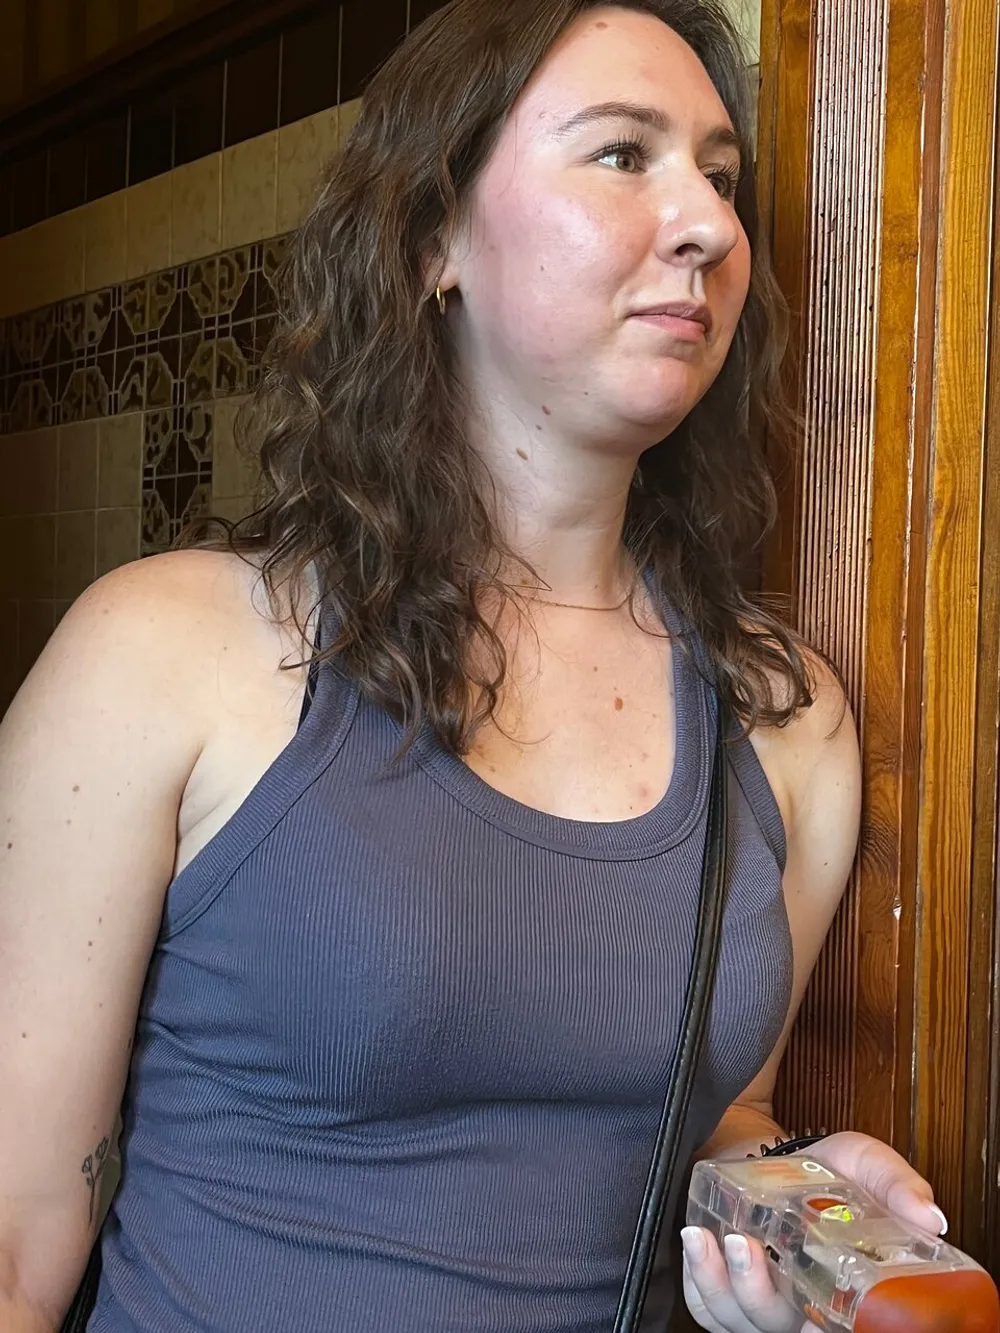 A woman with brown hair wearing a sleeveless top is holding a plastic container likely with some food items inside as she looks off to the side with a contemplative or distracted expression